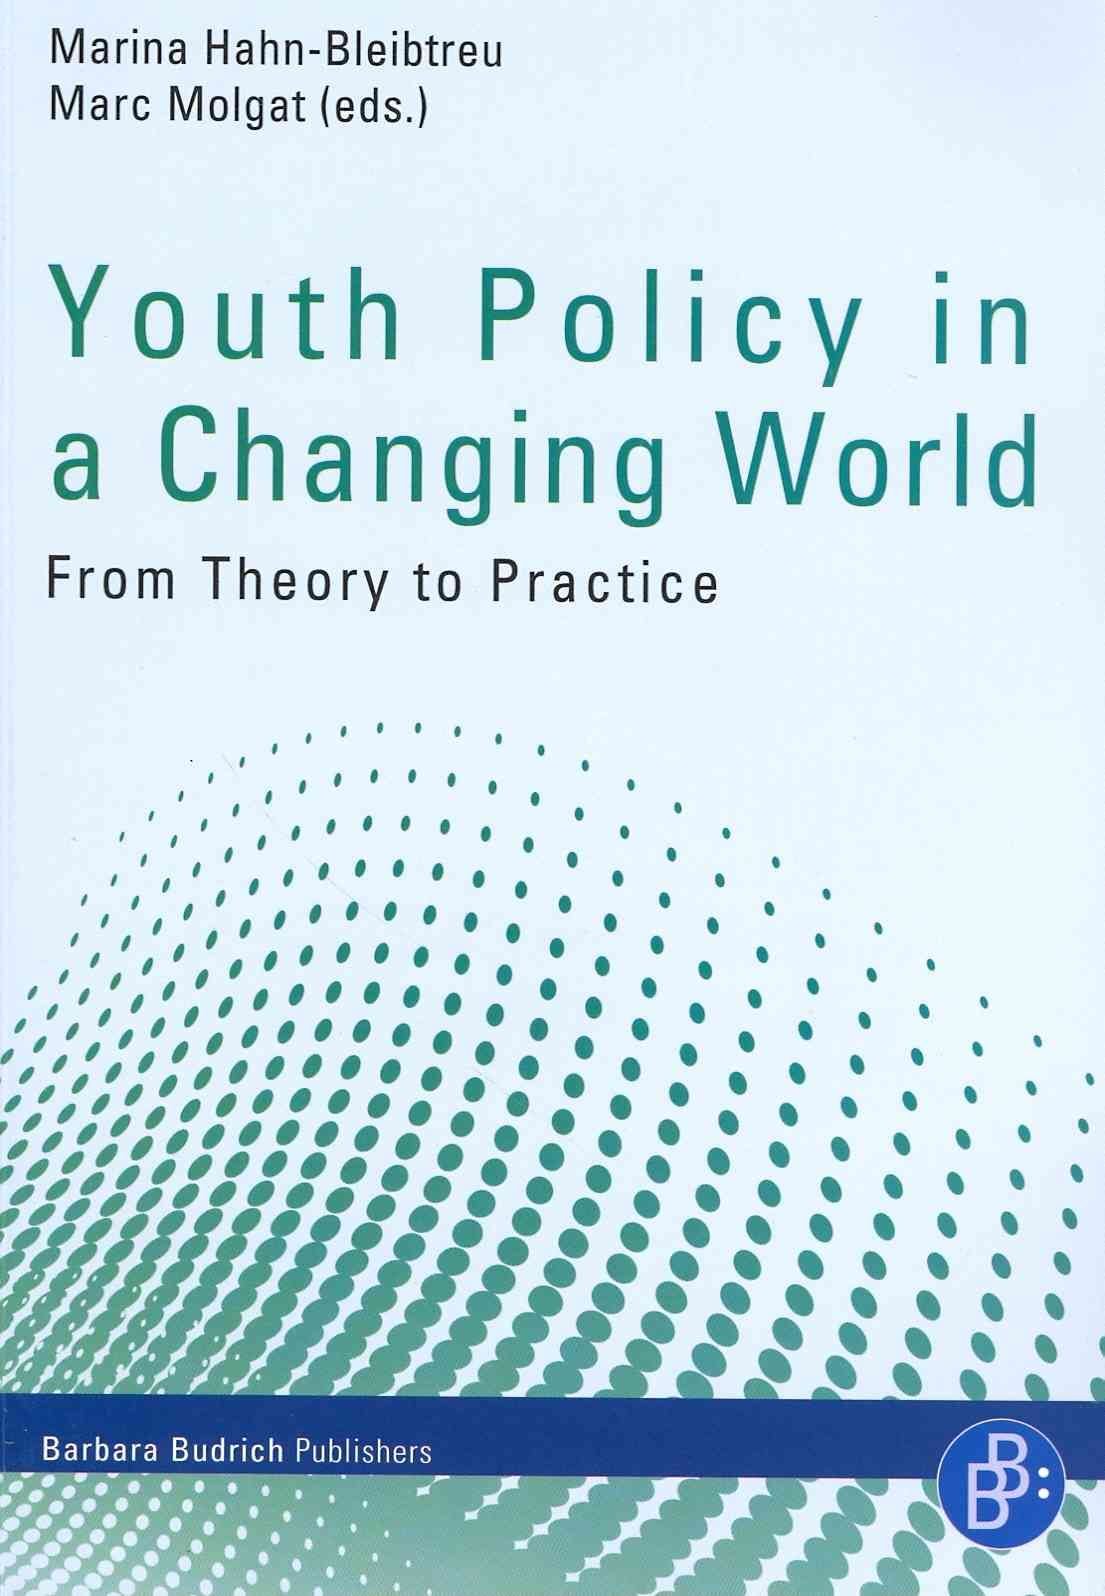 Youth Policy in a Changing World